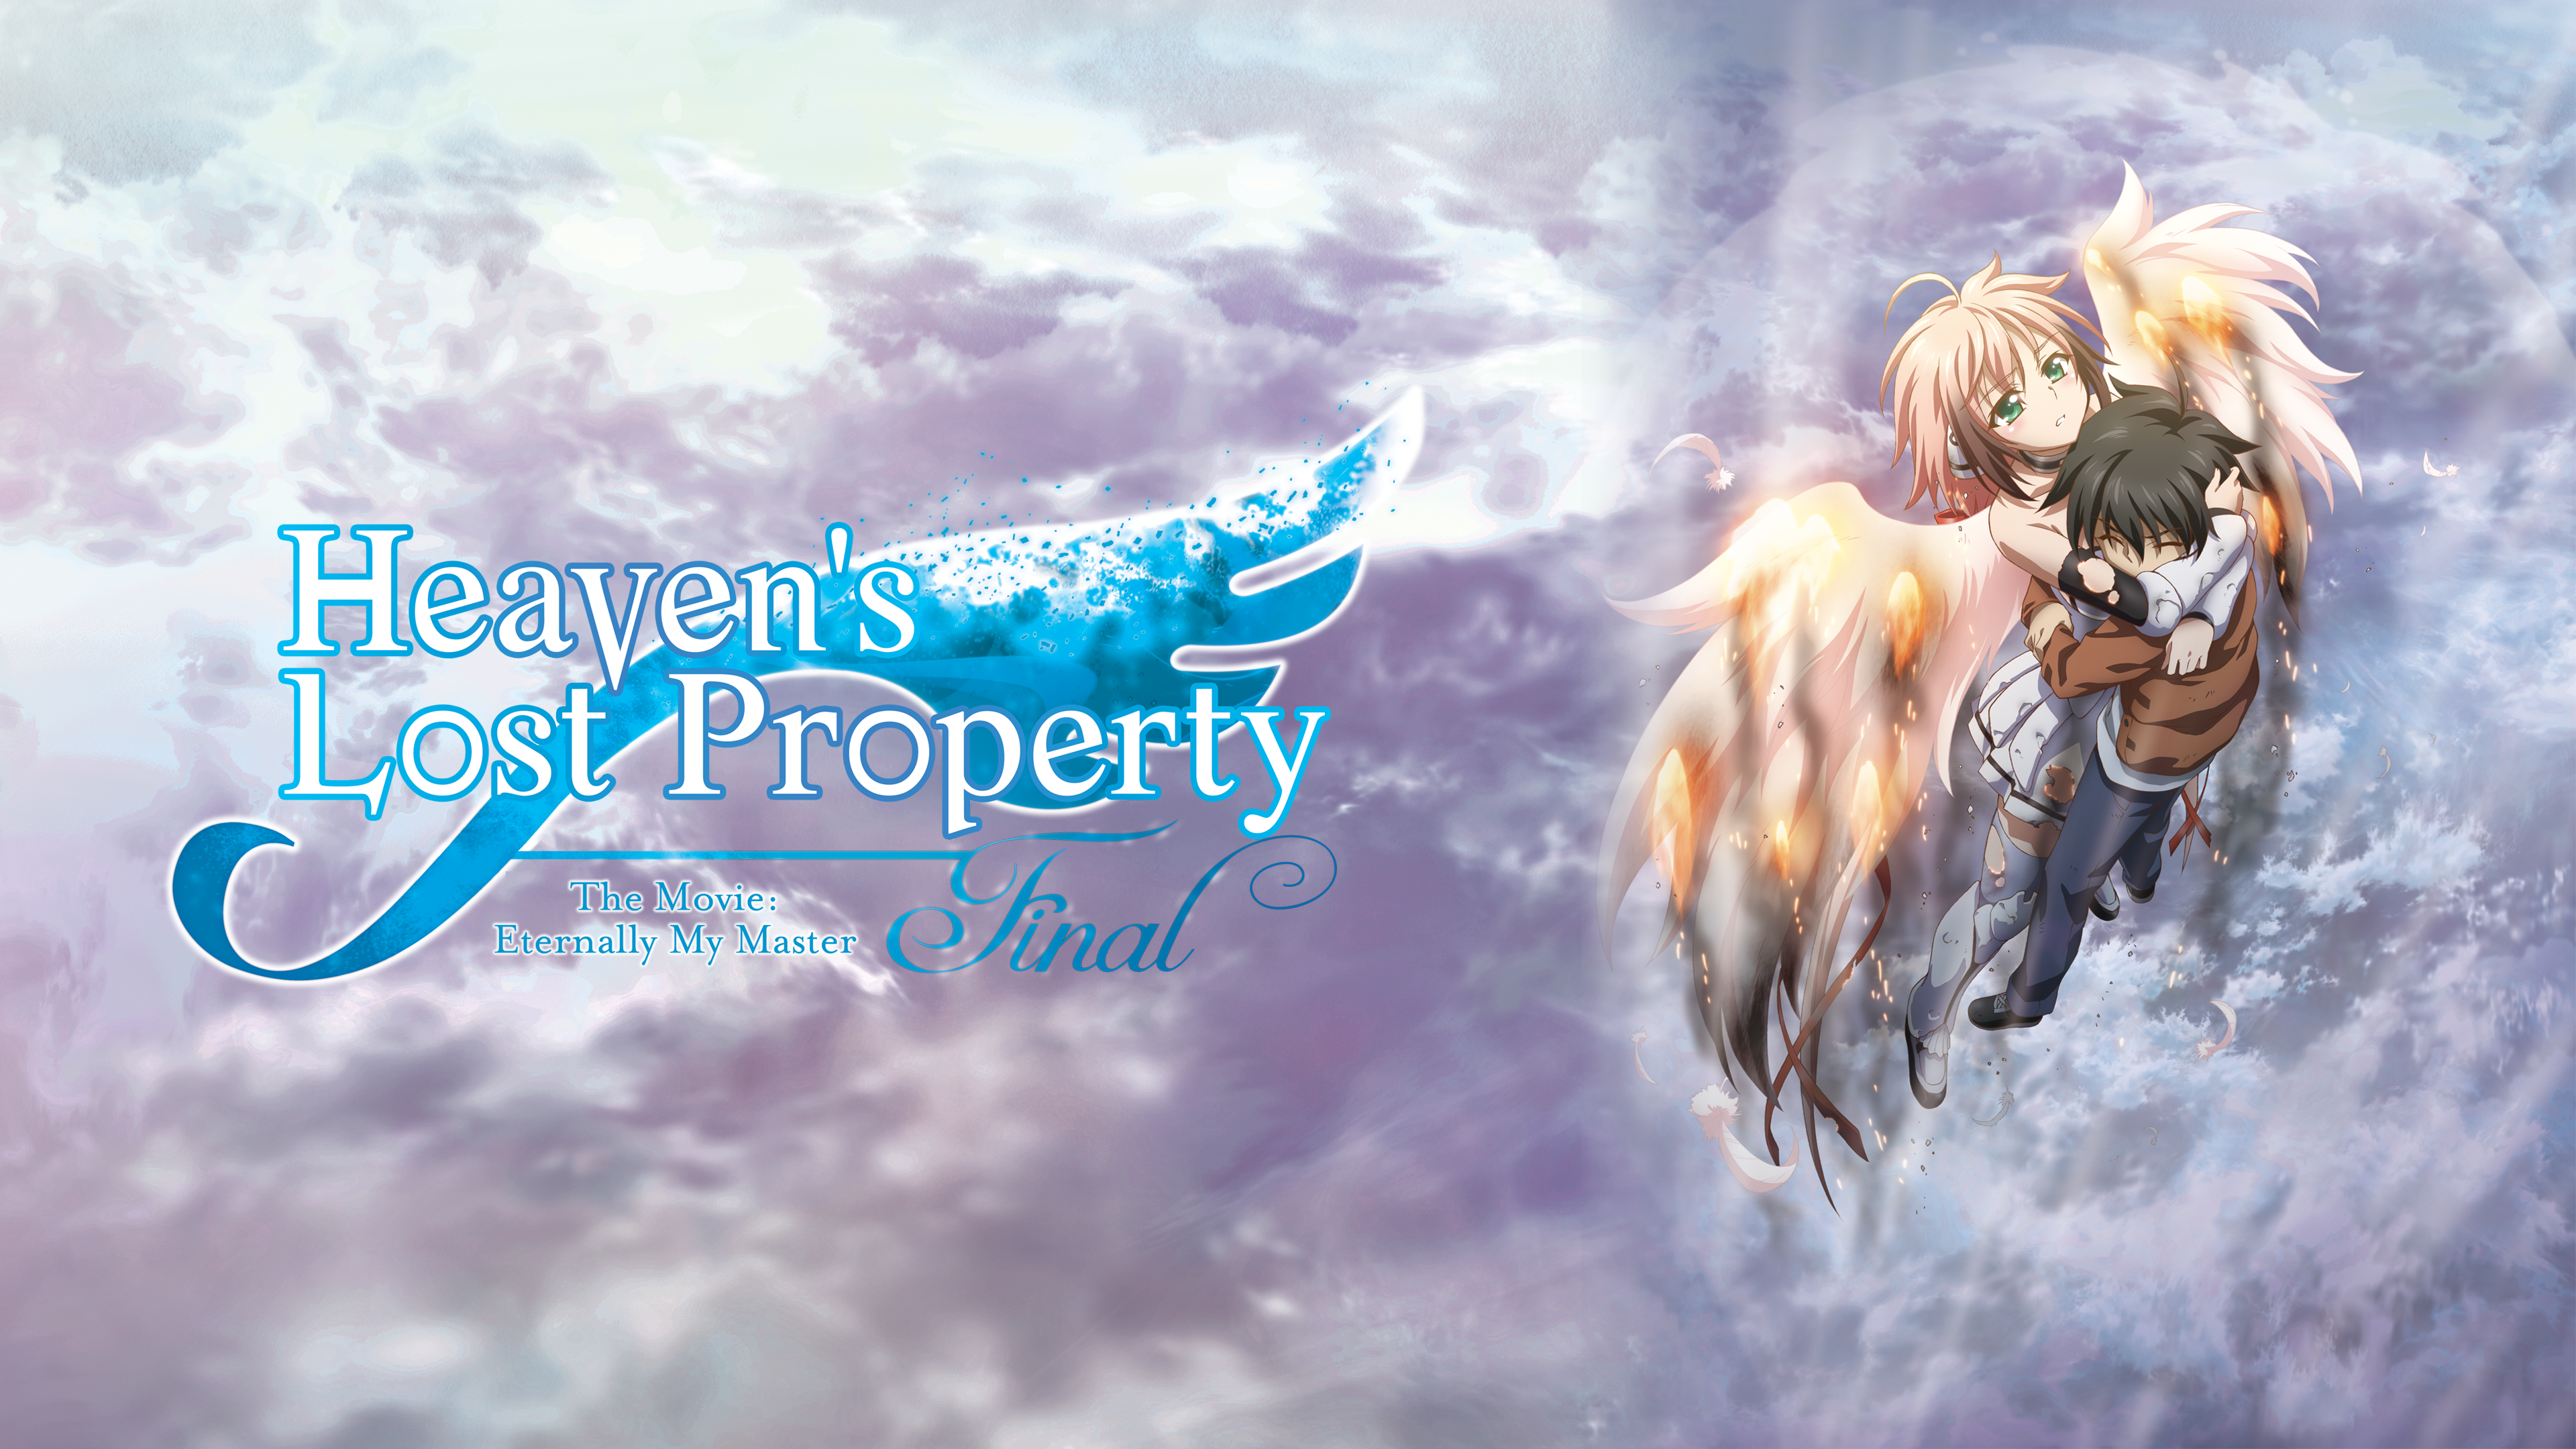 Topic · Heaven's lost property ·